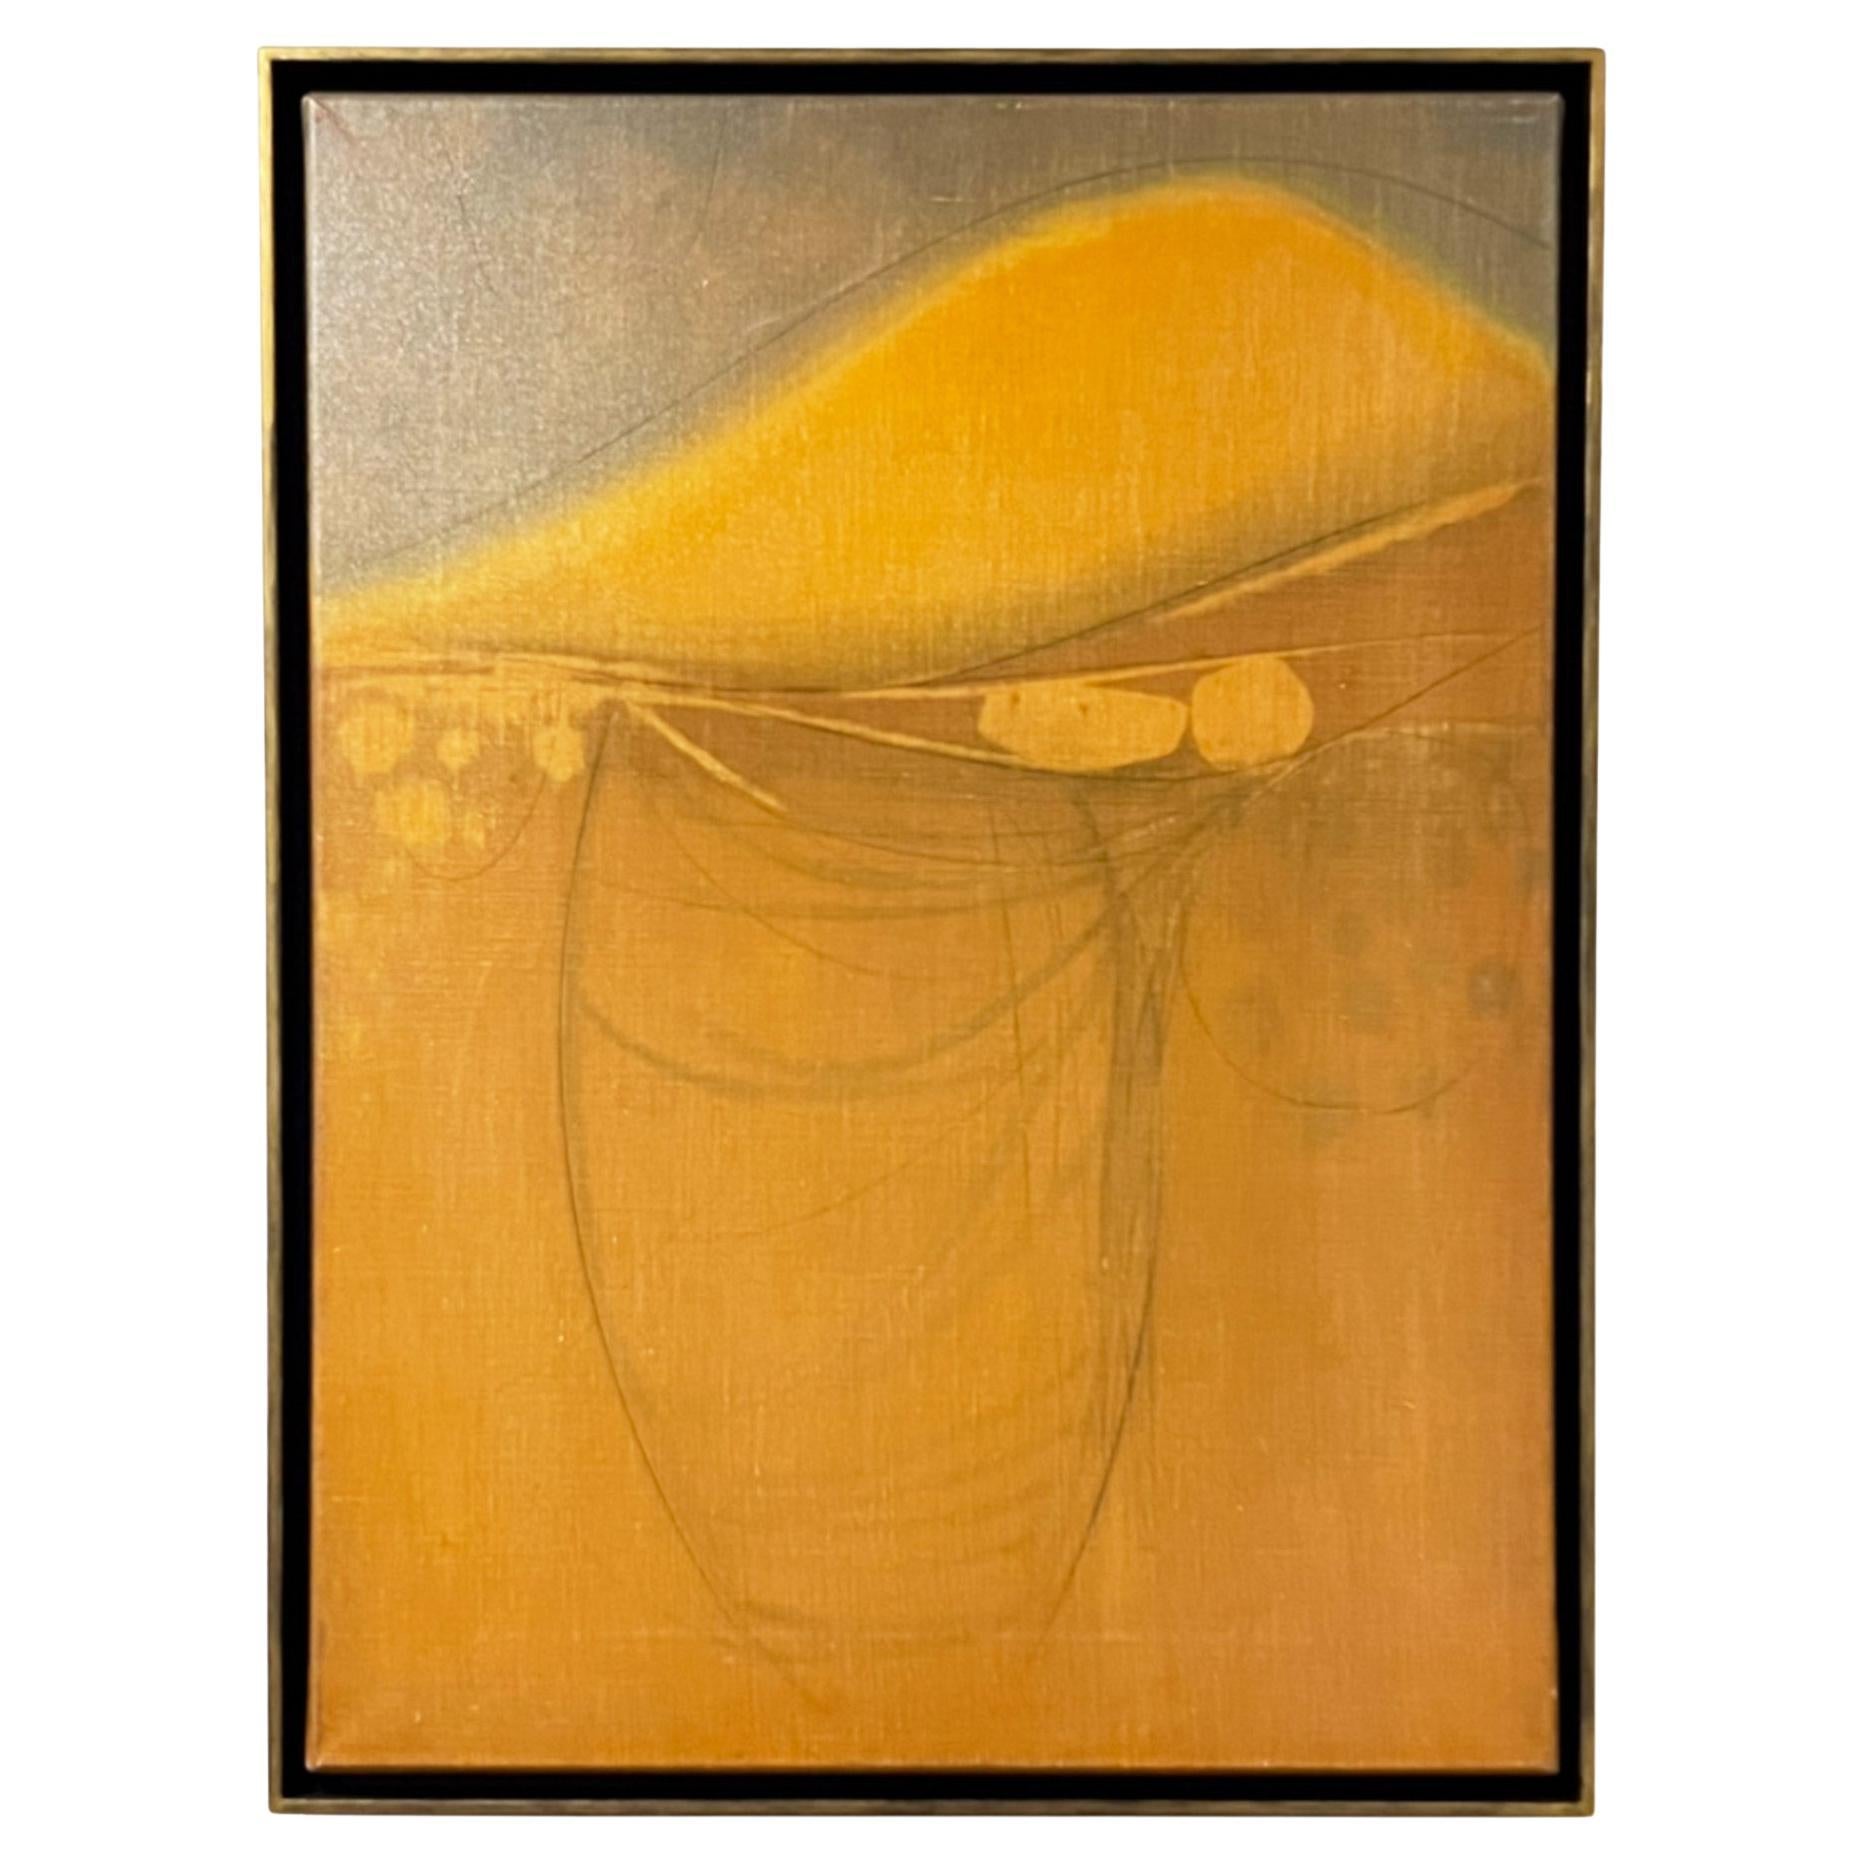 'Ornos' 1964, Oil & Pencil On Canvas by Michael Snow, Signed Verso